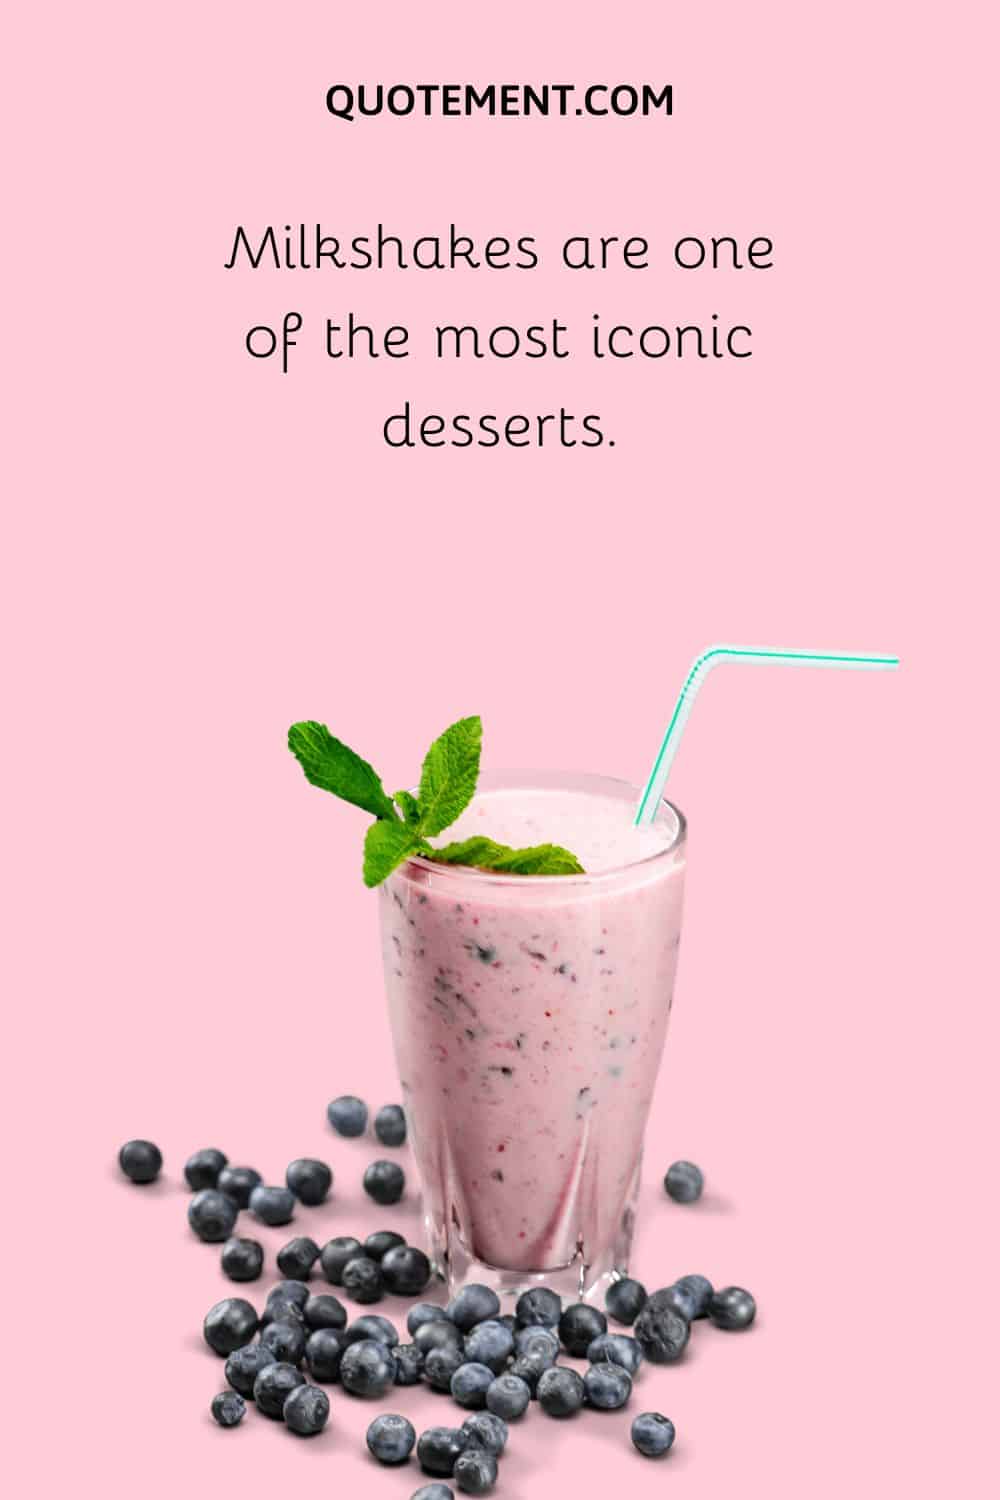 Milkshakes are one of the most iconic desserts.